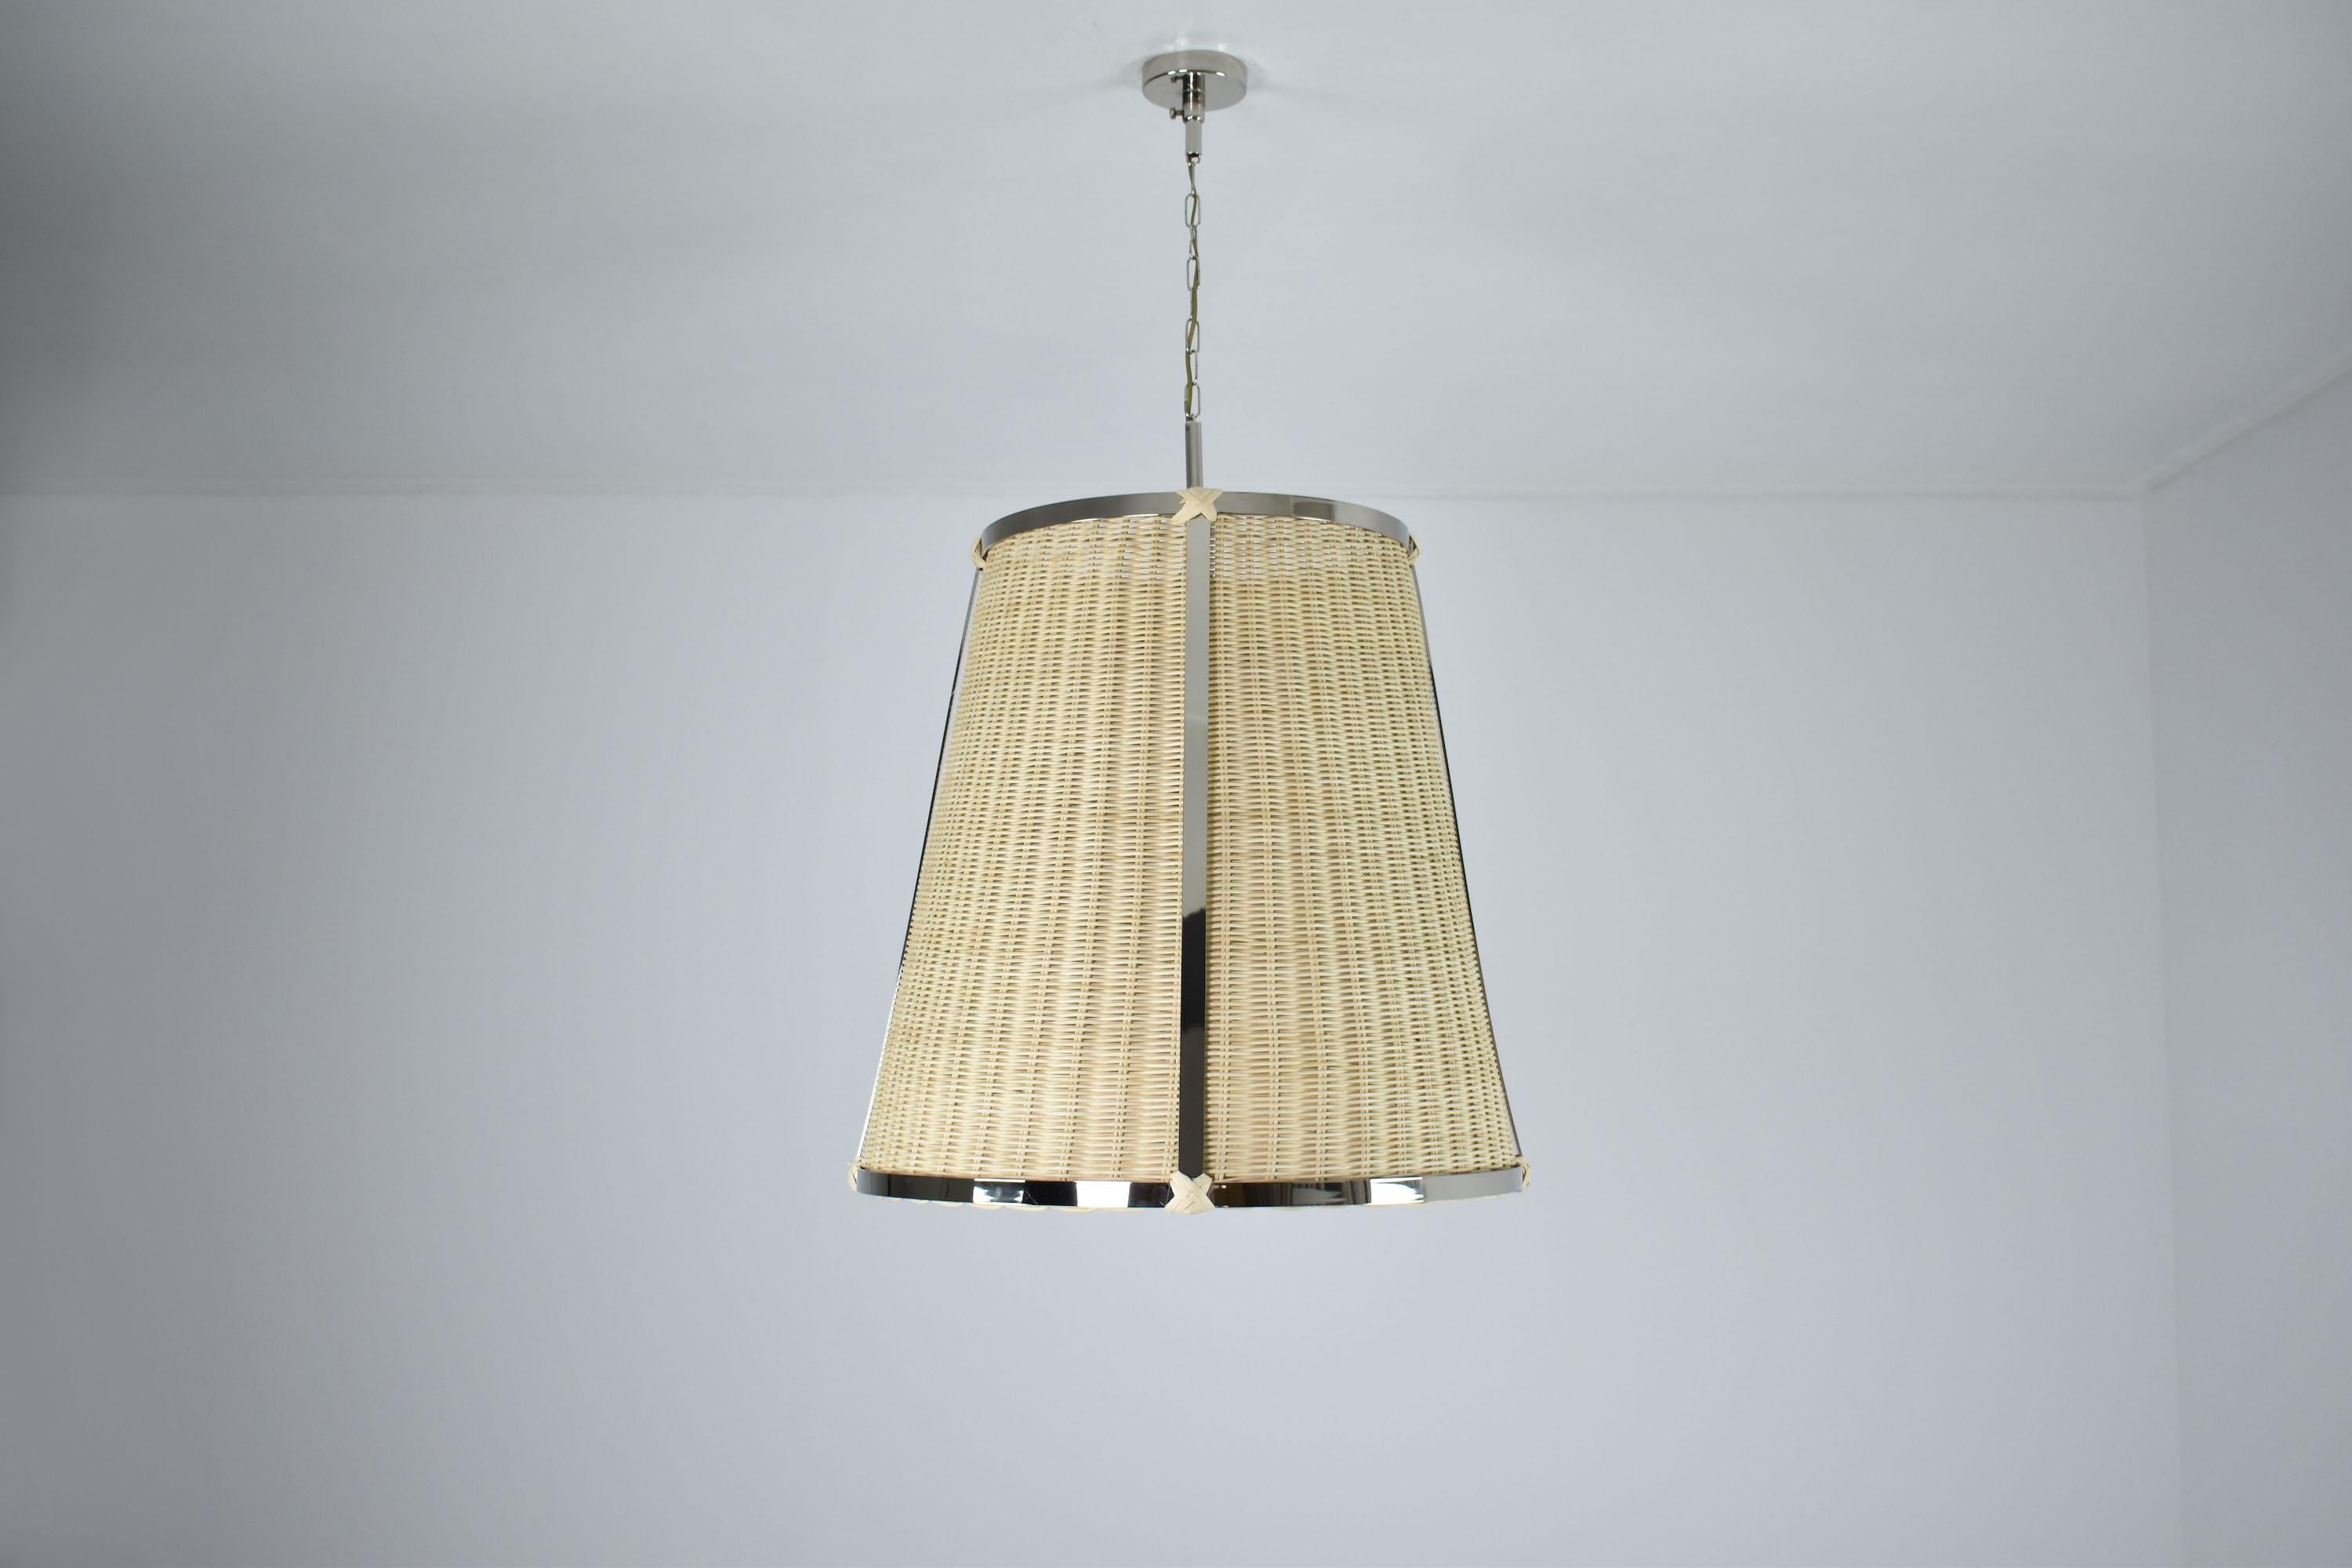 This pendant light fixture is a contemporary, made-to-Measure piece that is perfect for living areas or as kitchen island lights. The fixture is composed of a brass nickel-plated structure that has been expertly handcrafted, and a meticulously